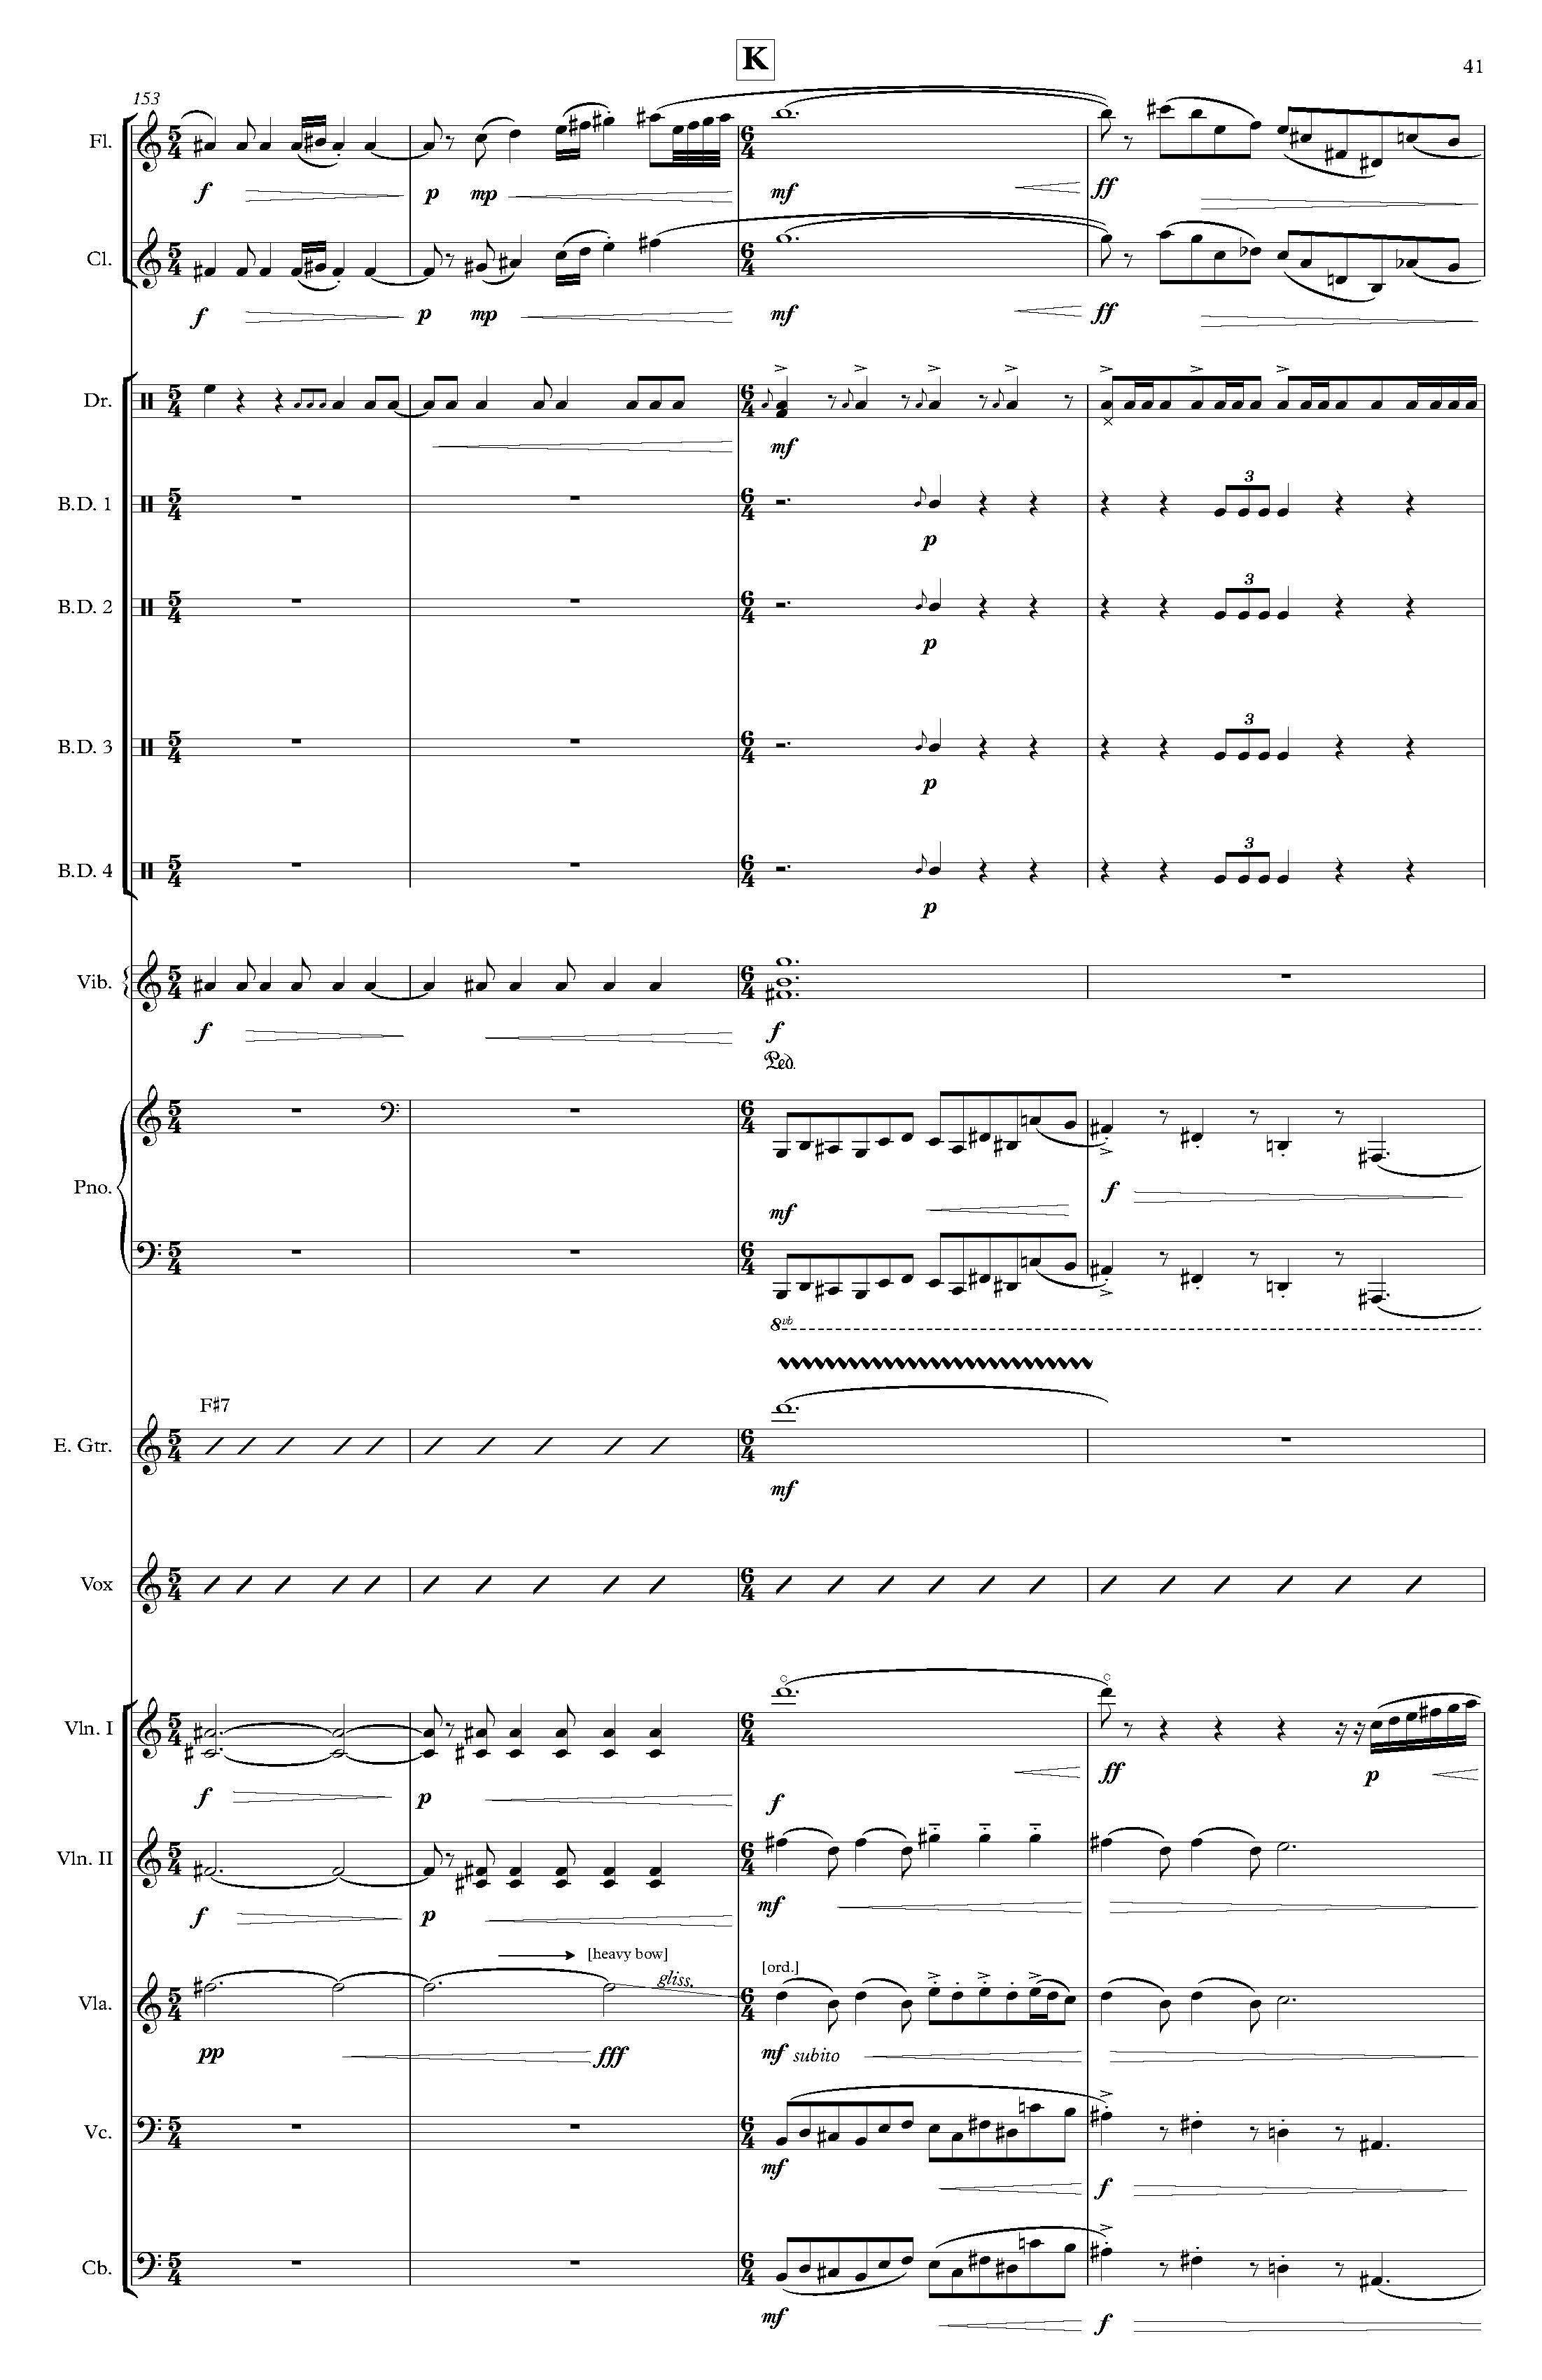 The Rembrandt of Avenue A - Complete Score_Page_47.jpg